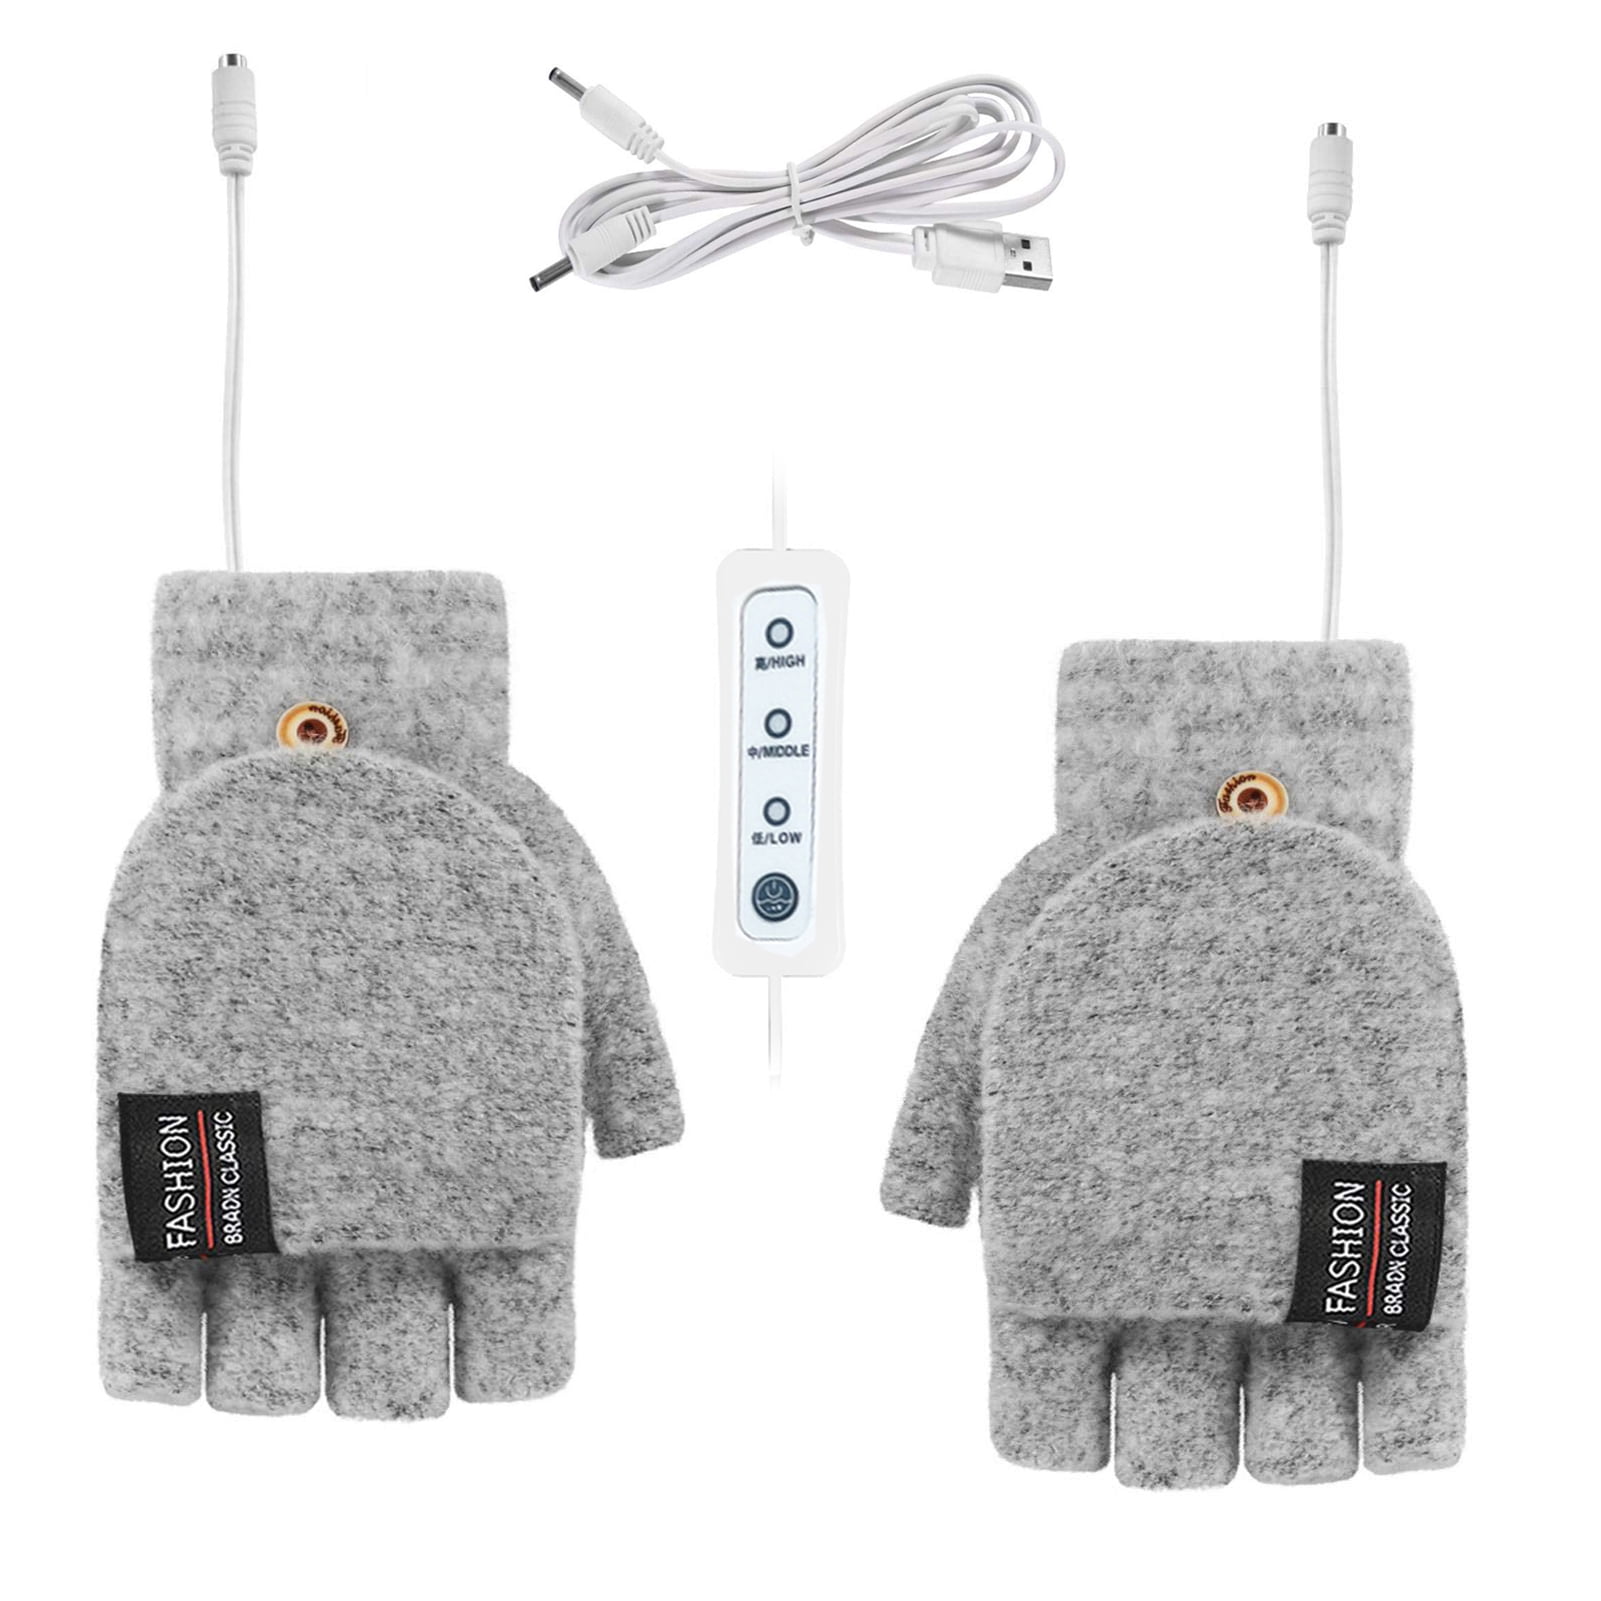 Littleduckling USB Heated Gloves 5V Low Voltage Electric Thermal Mitten Gloves Full & Half Hands Heated Gloves Knitting Fingerless Heating Hands